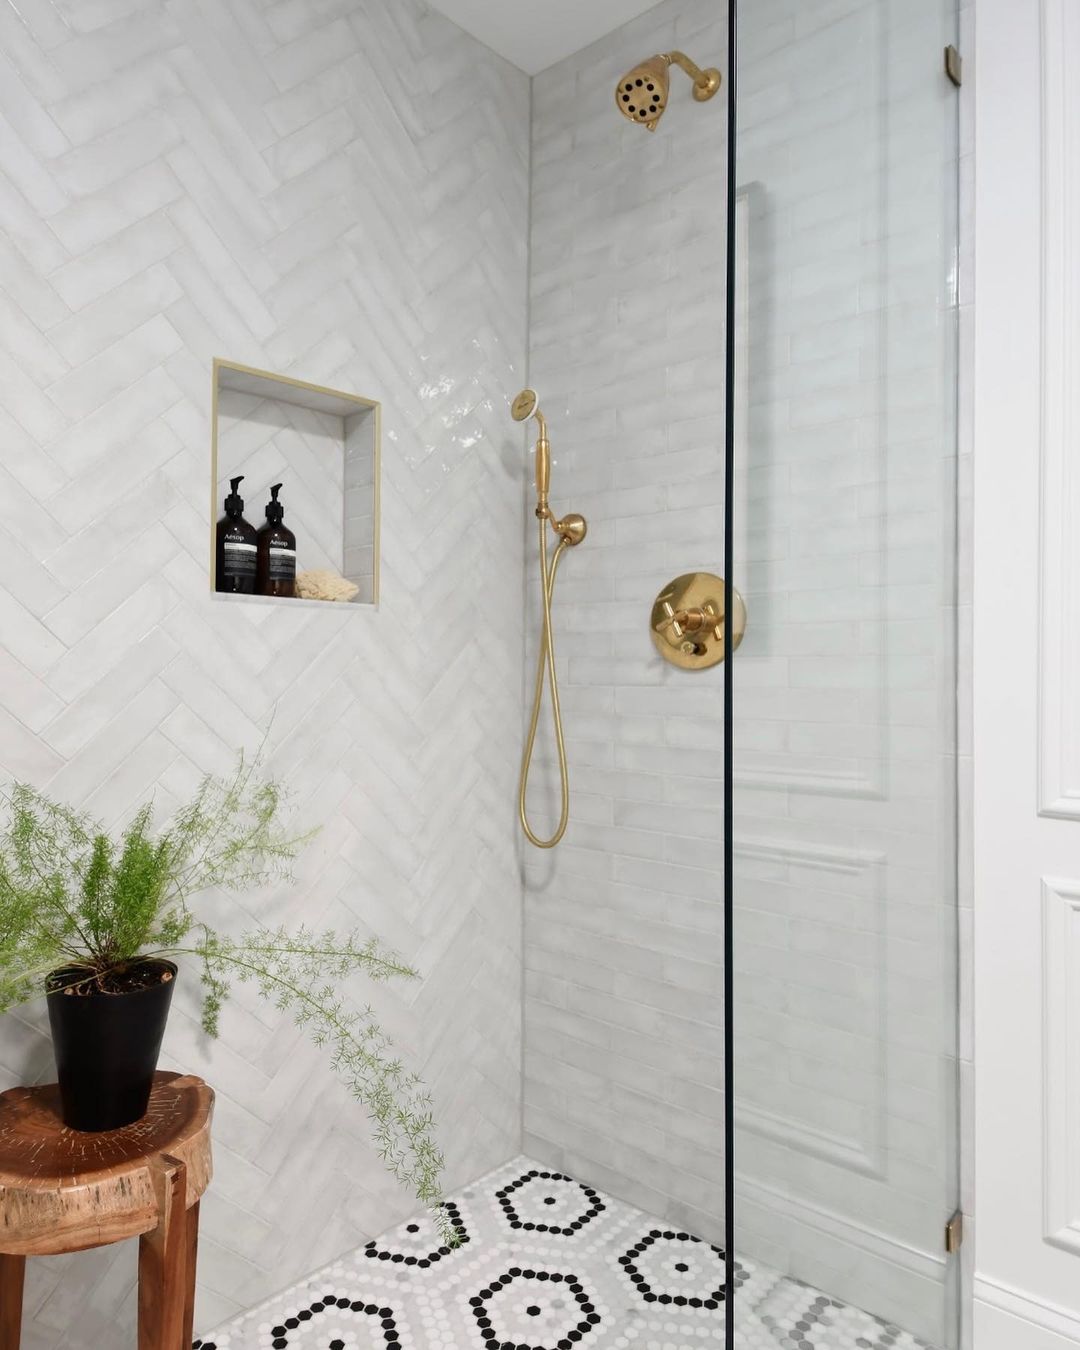  Chic Herringbone Tile Shower with Gold Fixtures and Patterned Floor